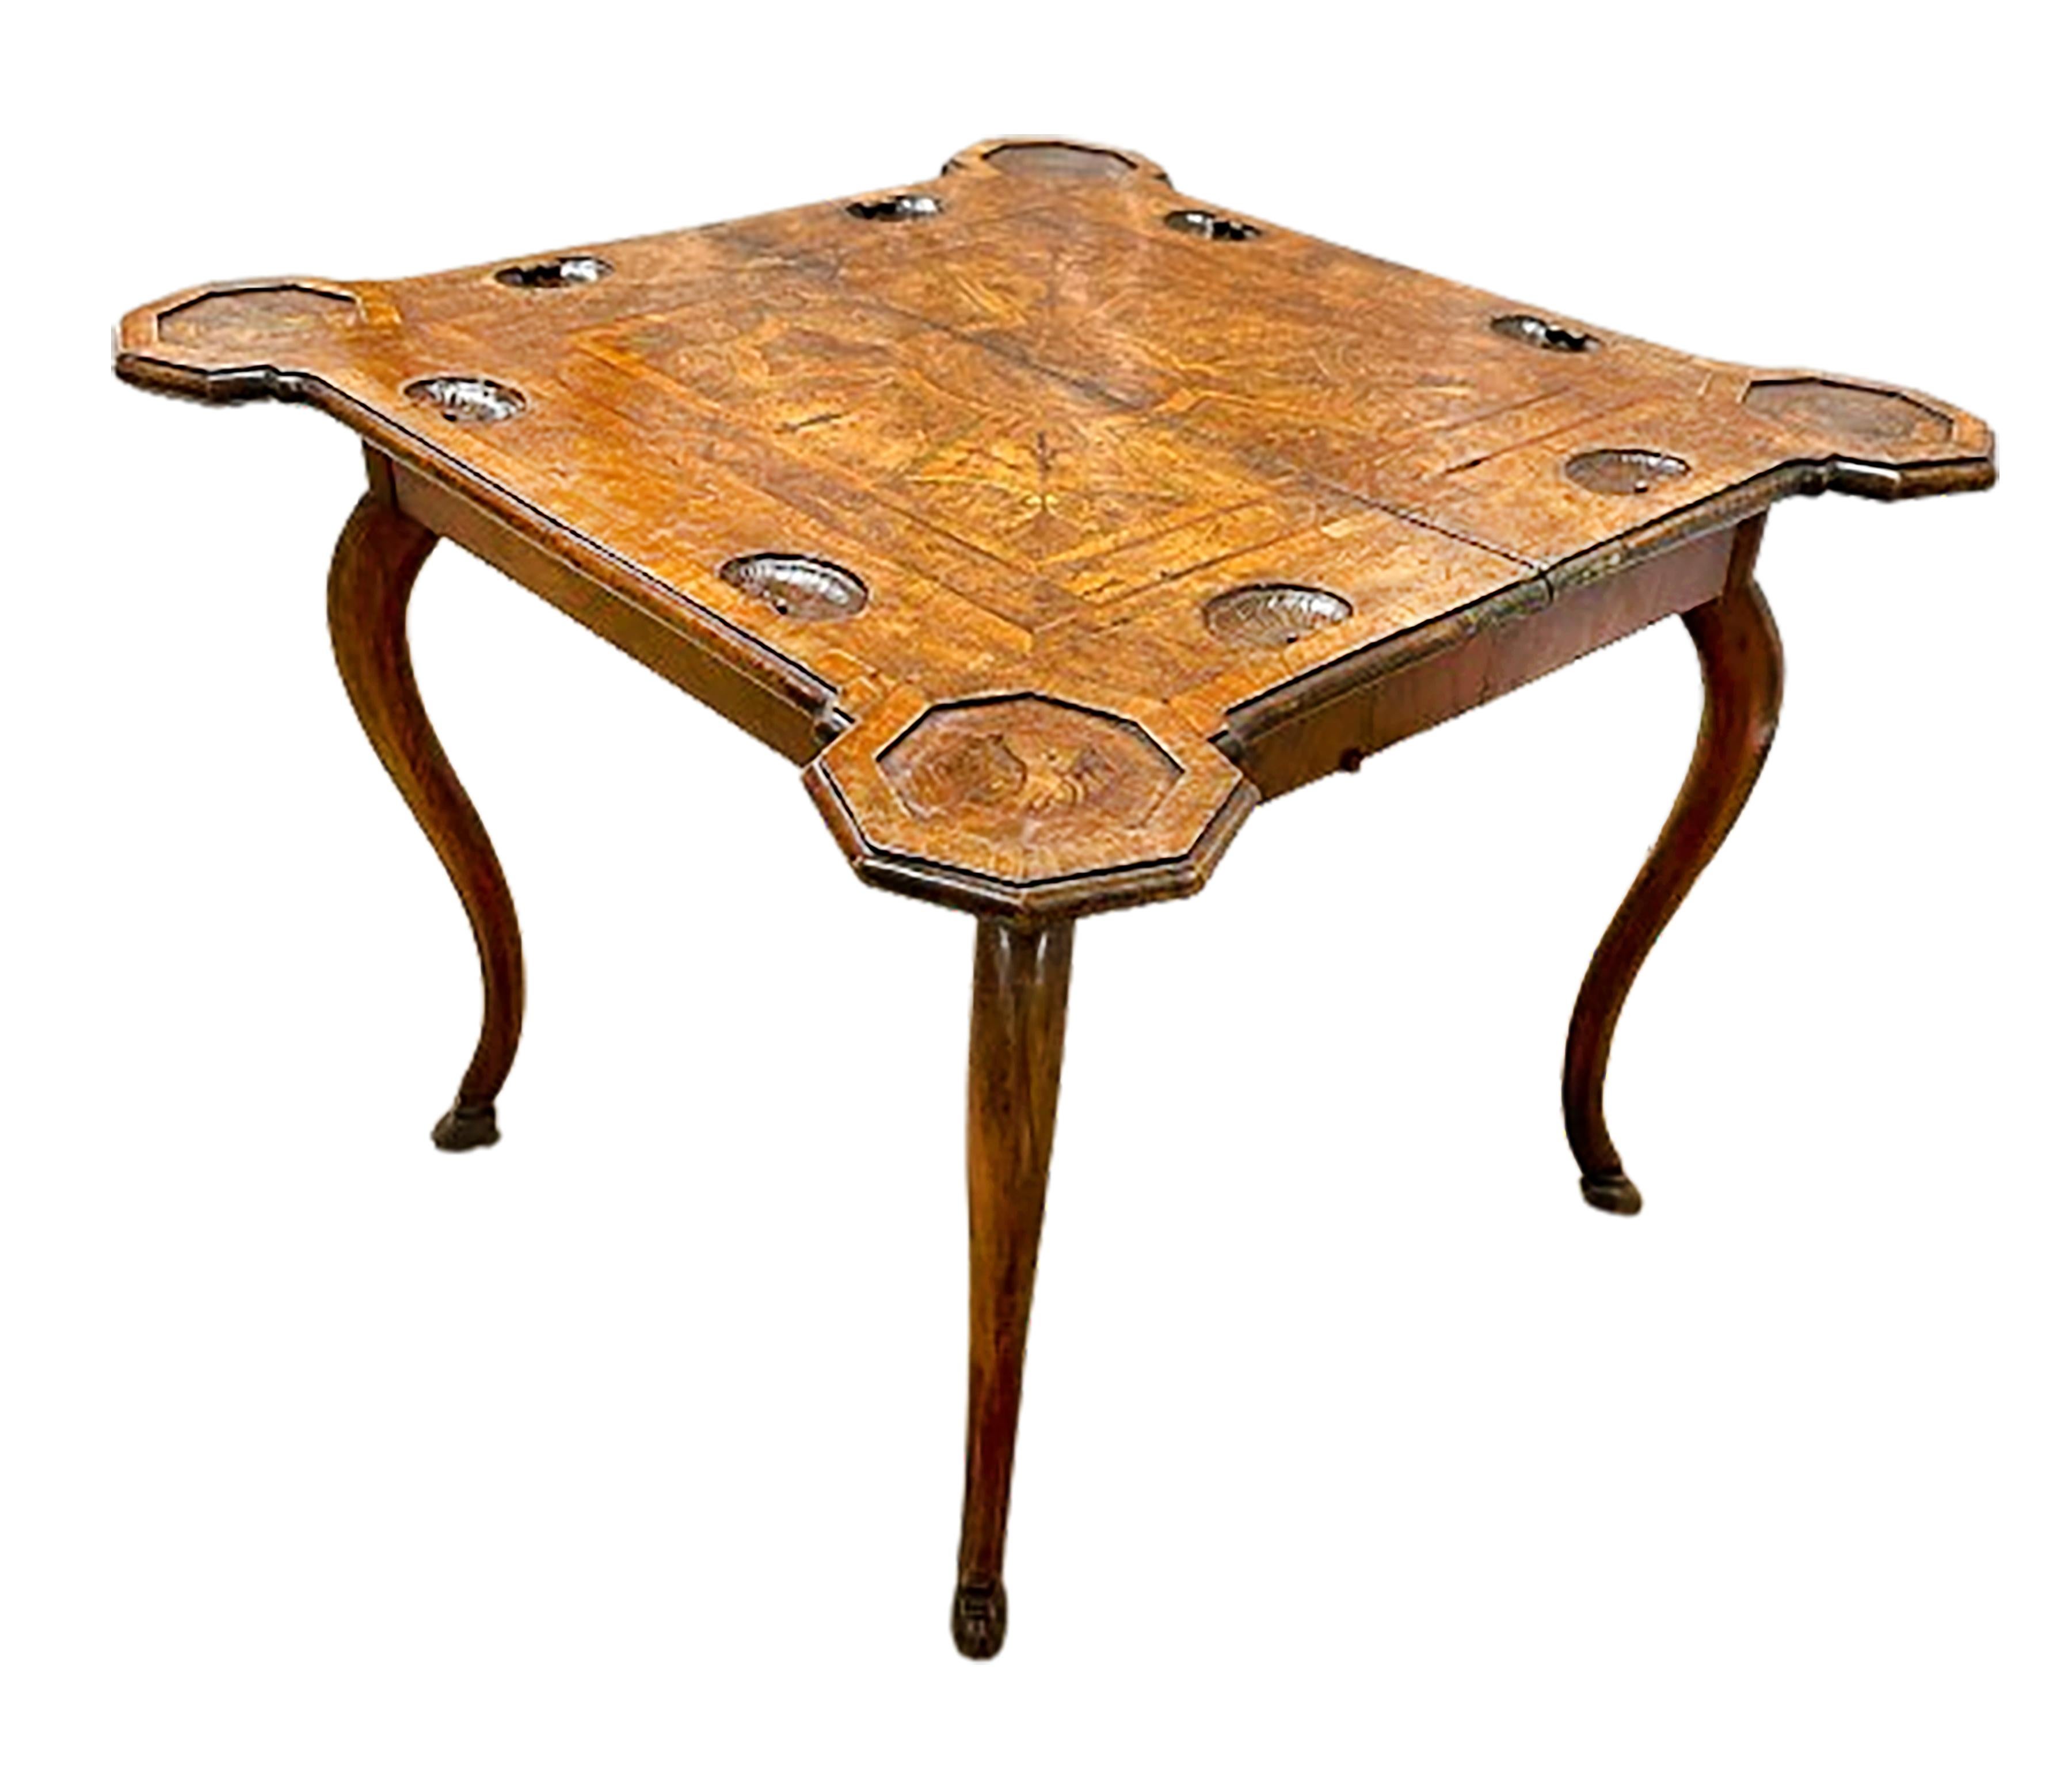 An exquisite 18th century period game table. This stunning game table folds open to reveal dual shell carvings on four sides of the top. Subtle inlaid parquetried and burled pattern trim in the center of the top among a beautifully symmetrical